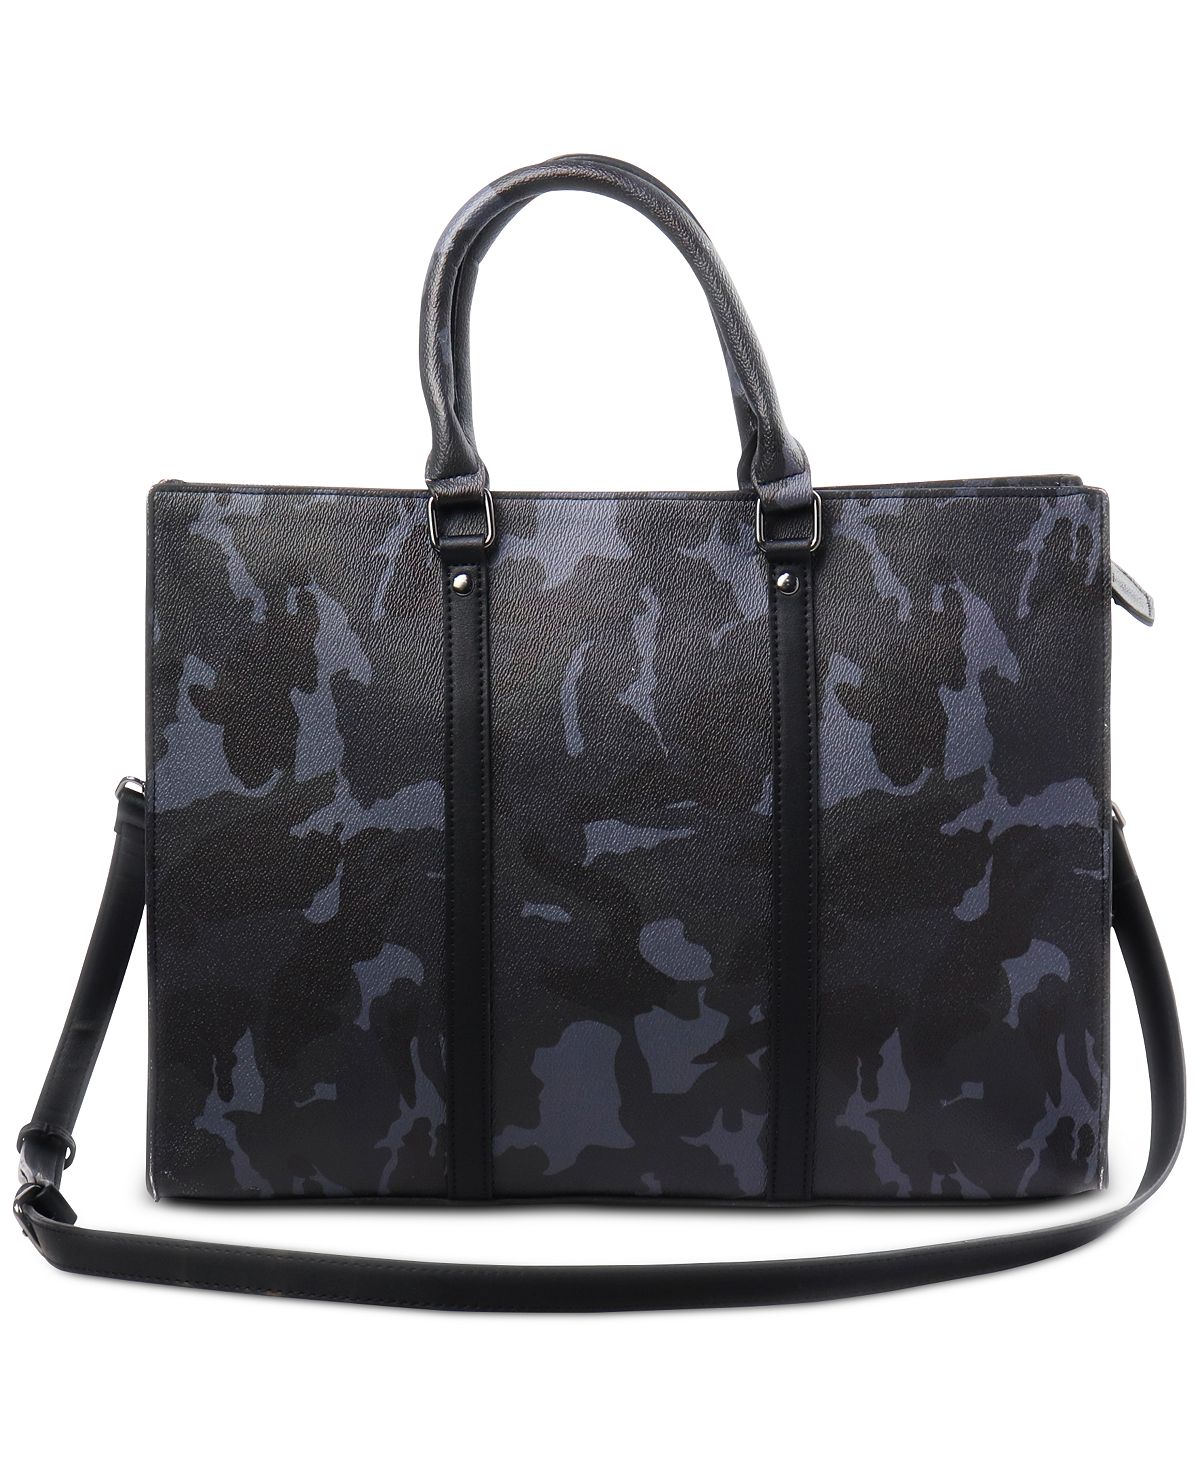 Inc International Concepts Tote Briefcase Navy Camoflauge